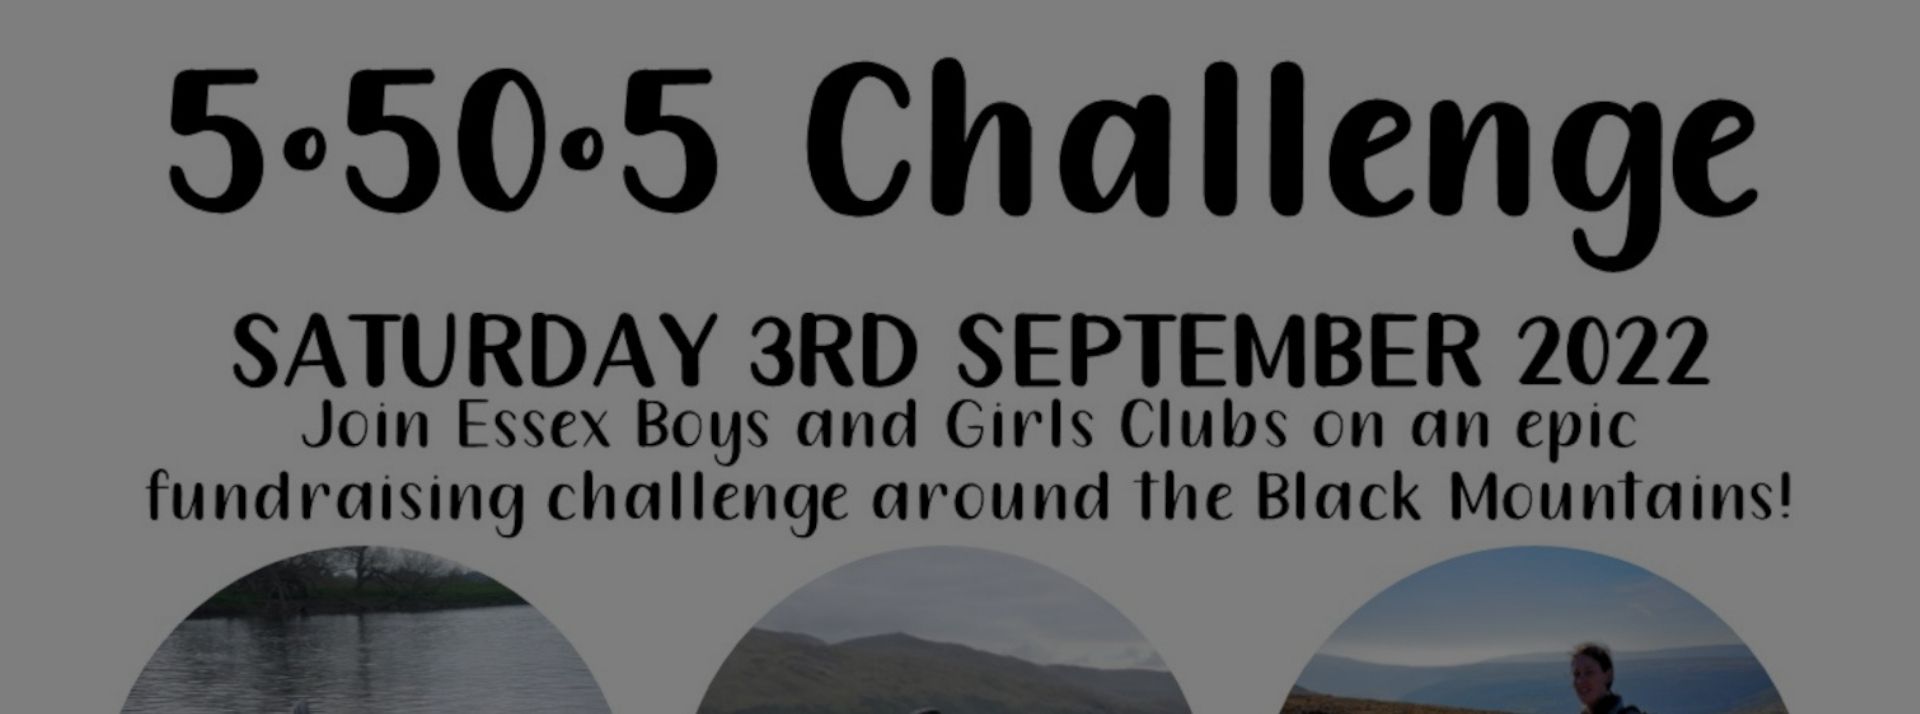 The 5.50.5 Fundraising Challenge